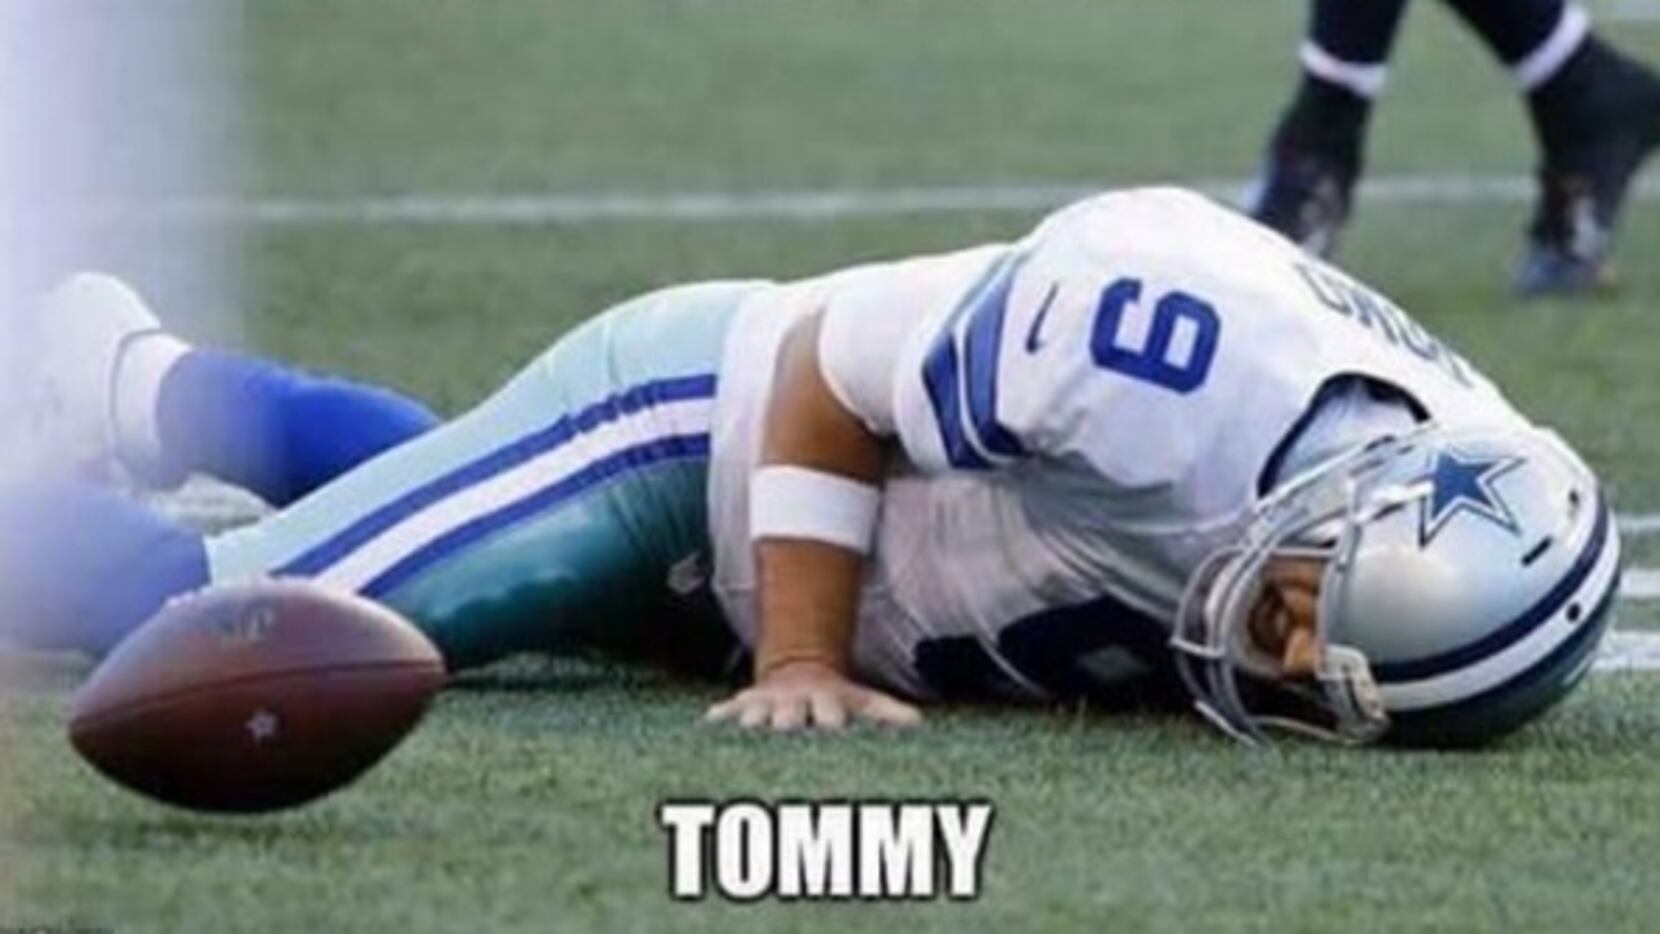 15 funny memes to get you ready for Cowboys-Eagles, including Trump walls  and Walking Dead